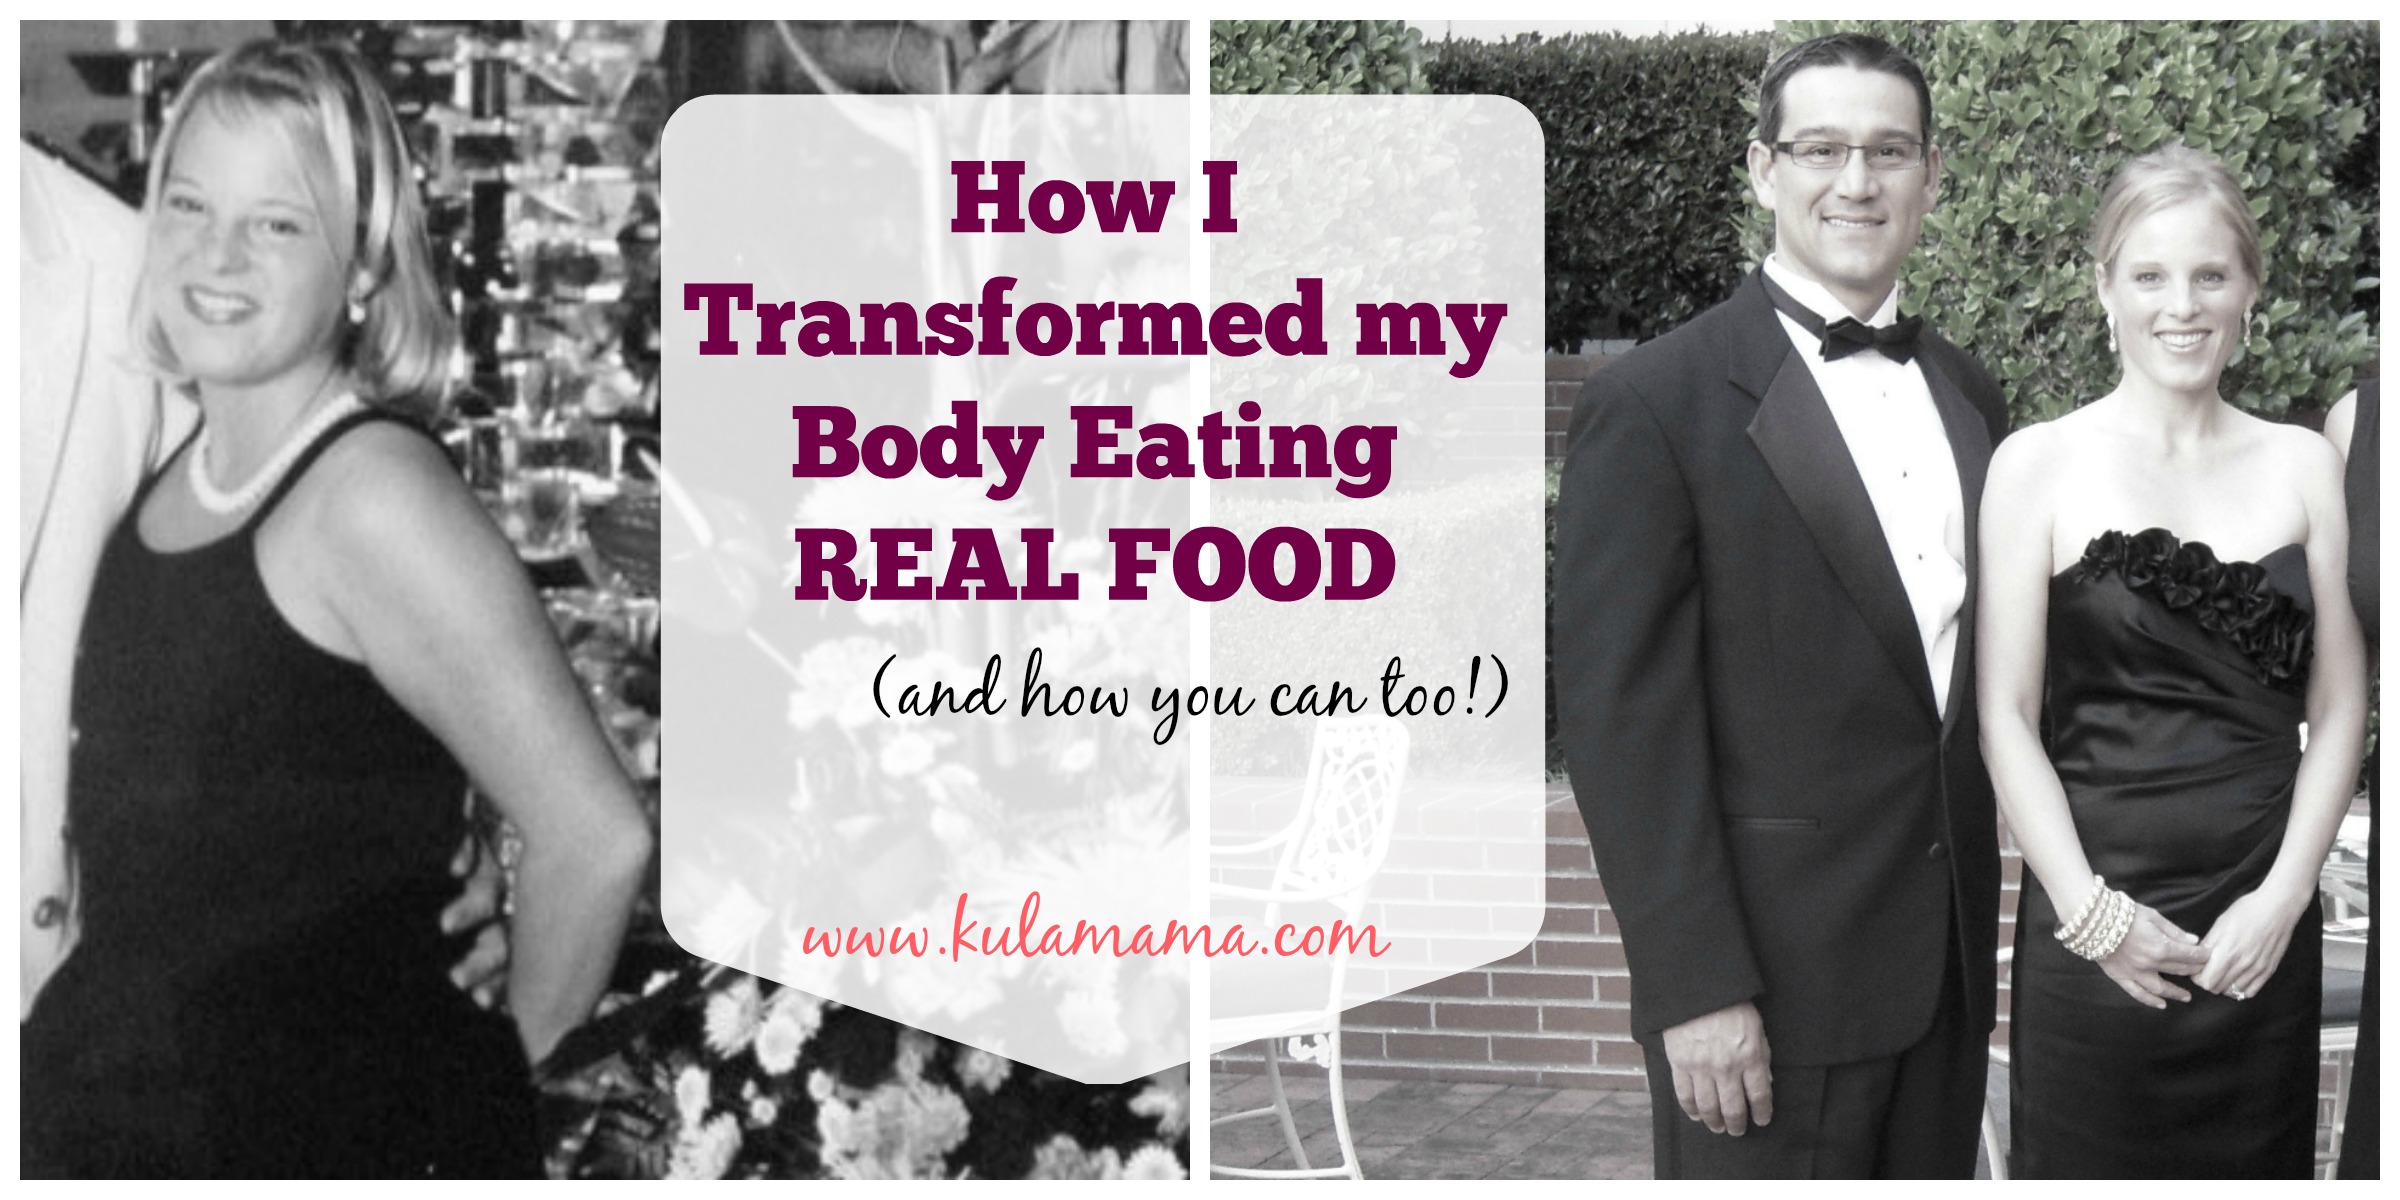 How I Transformed my Body Eating REAL FOOD (and how you can too)